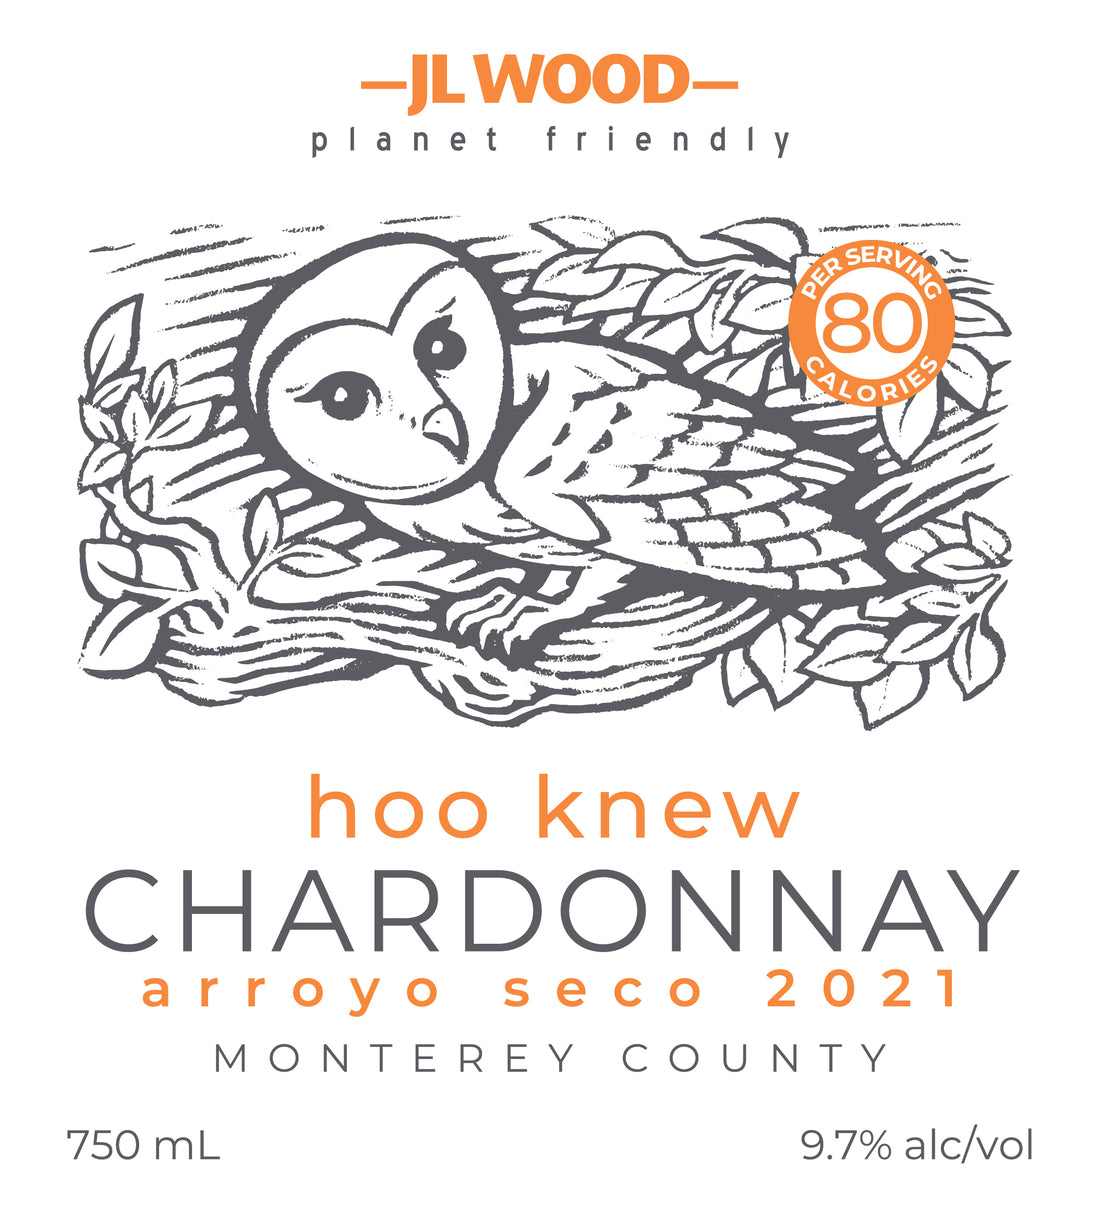 Press release:"Hoo Knew" Delivers Delicious Chardonnay with 30% Less Calories